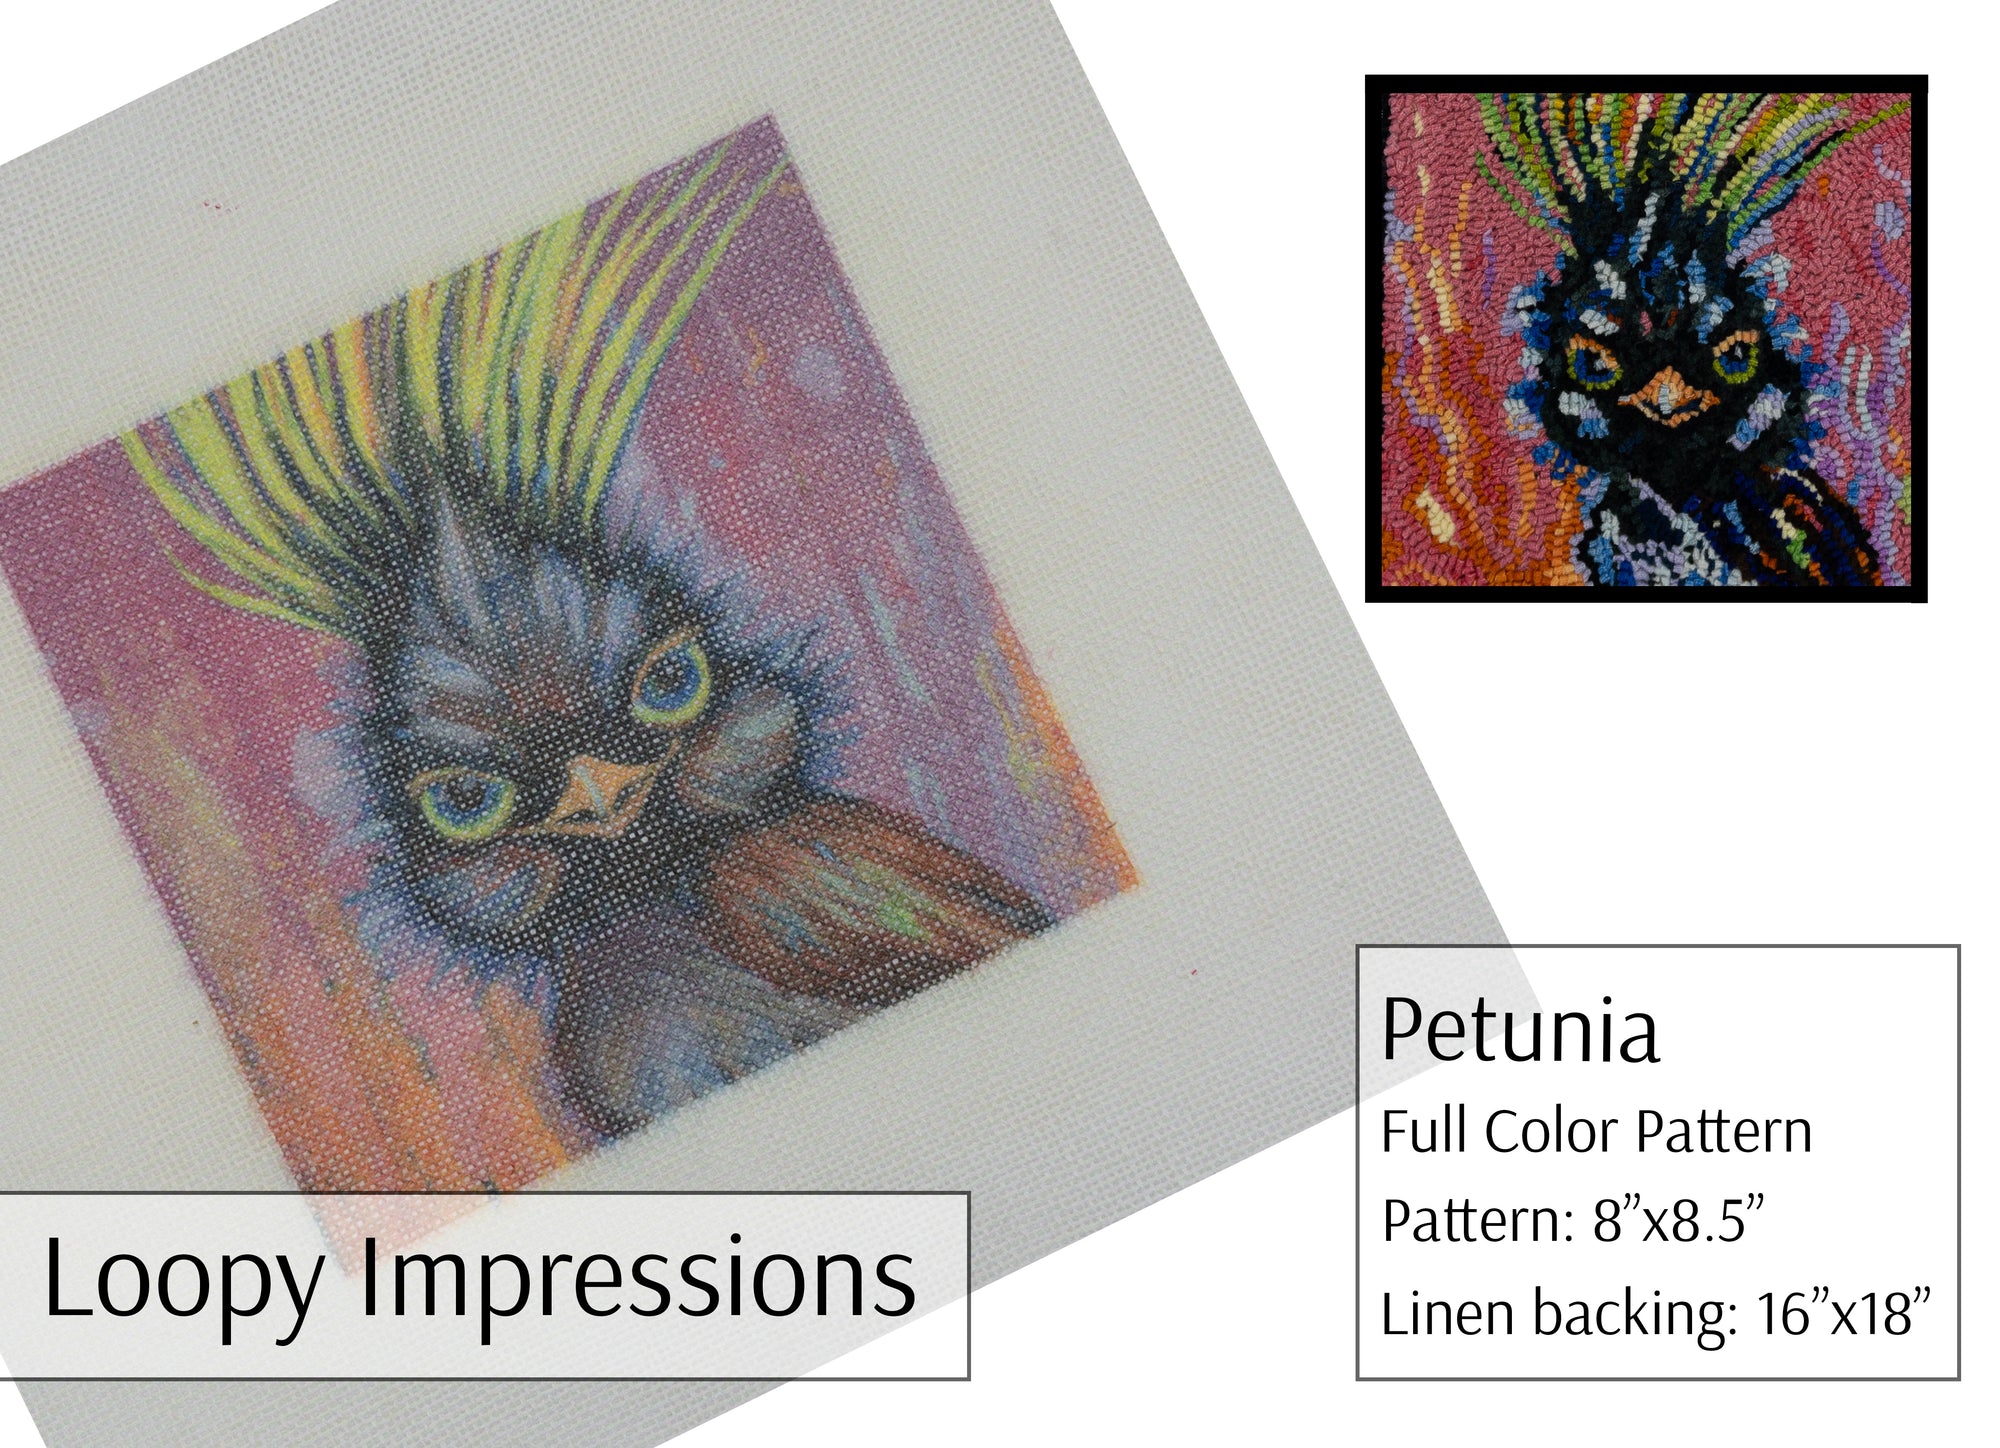 Loopy Impressions Full Color Pattern - Petunia